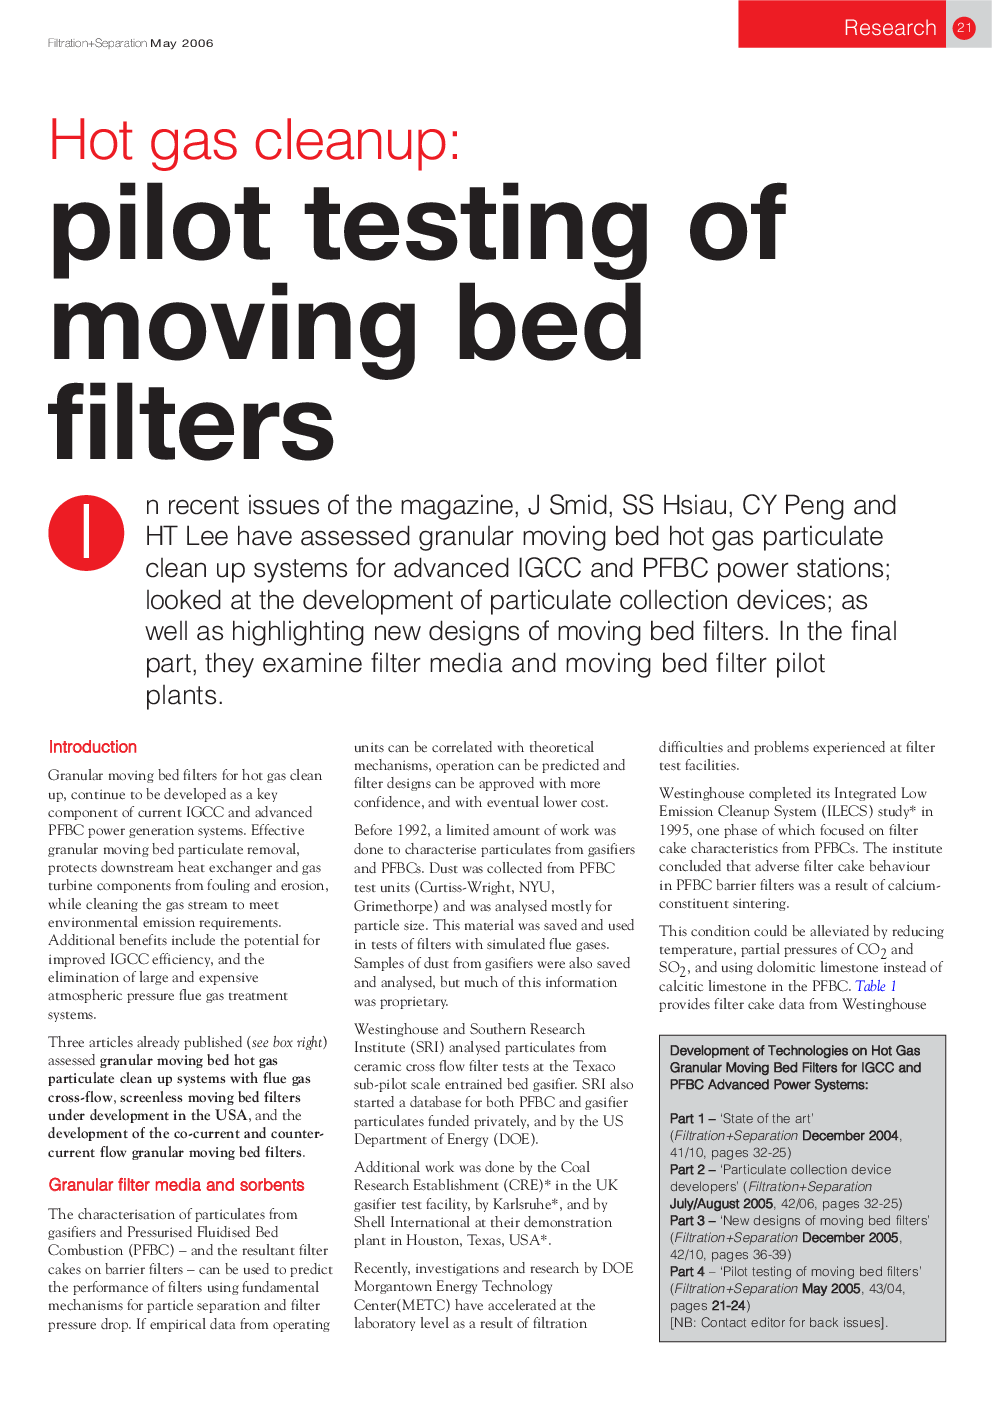 Hot gas cleanup: pilot testing of moving bed filters 